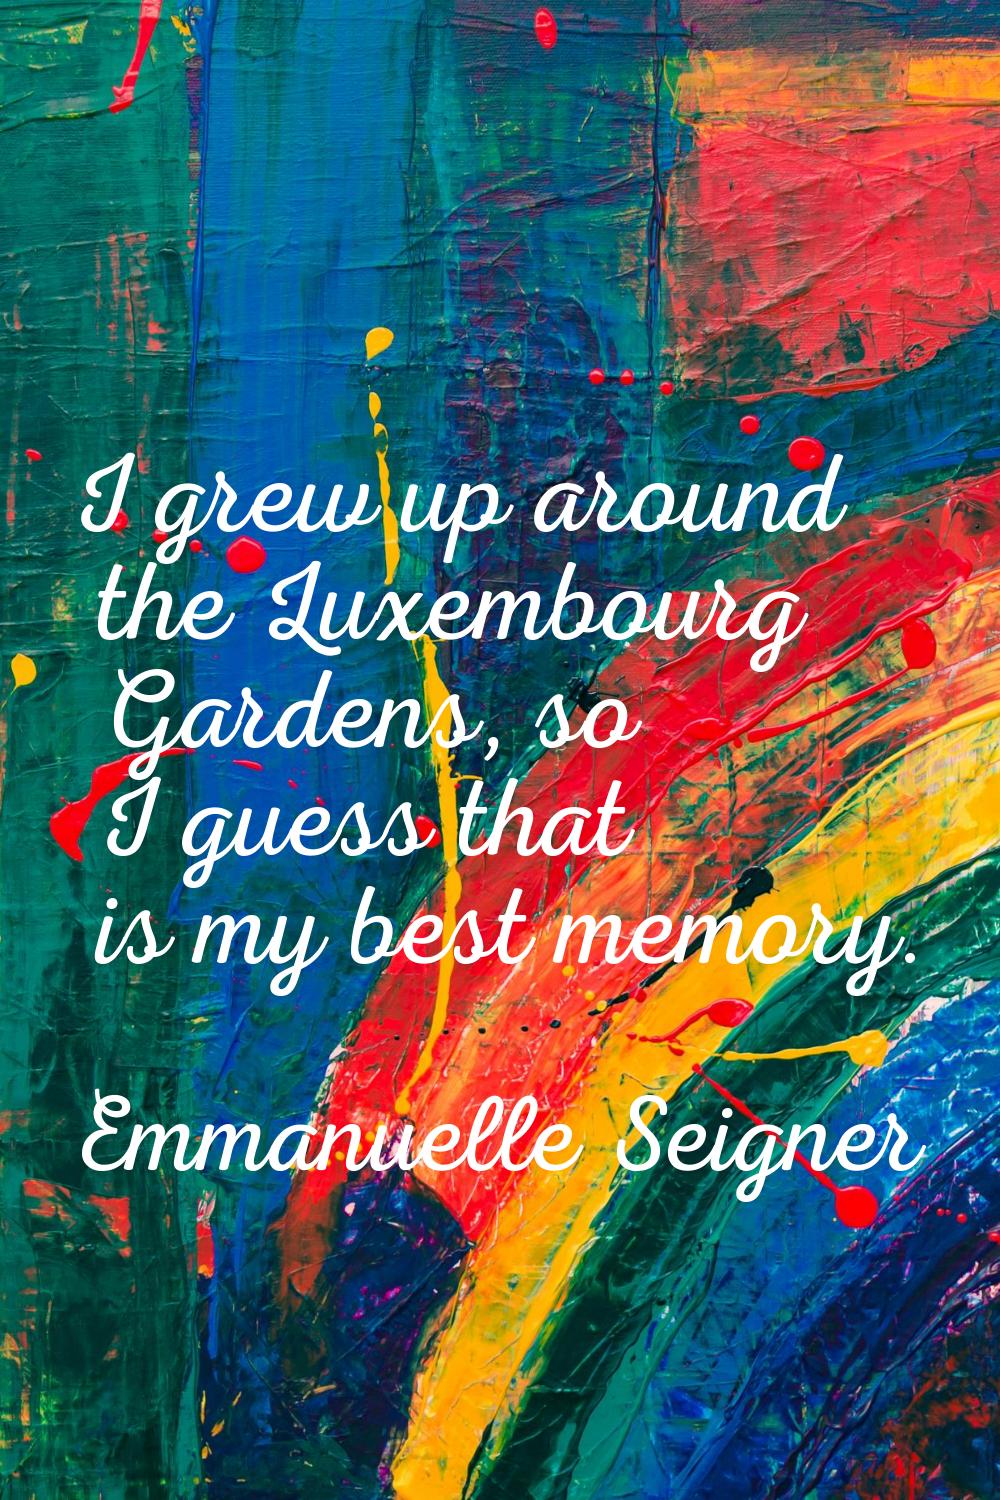 I grew up around the Luxembourg Gardens, so I guess that is my best memory.